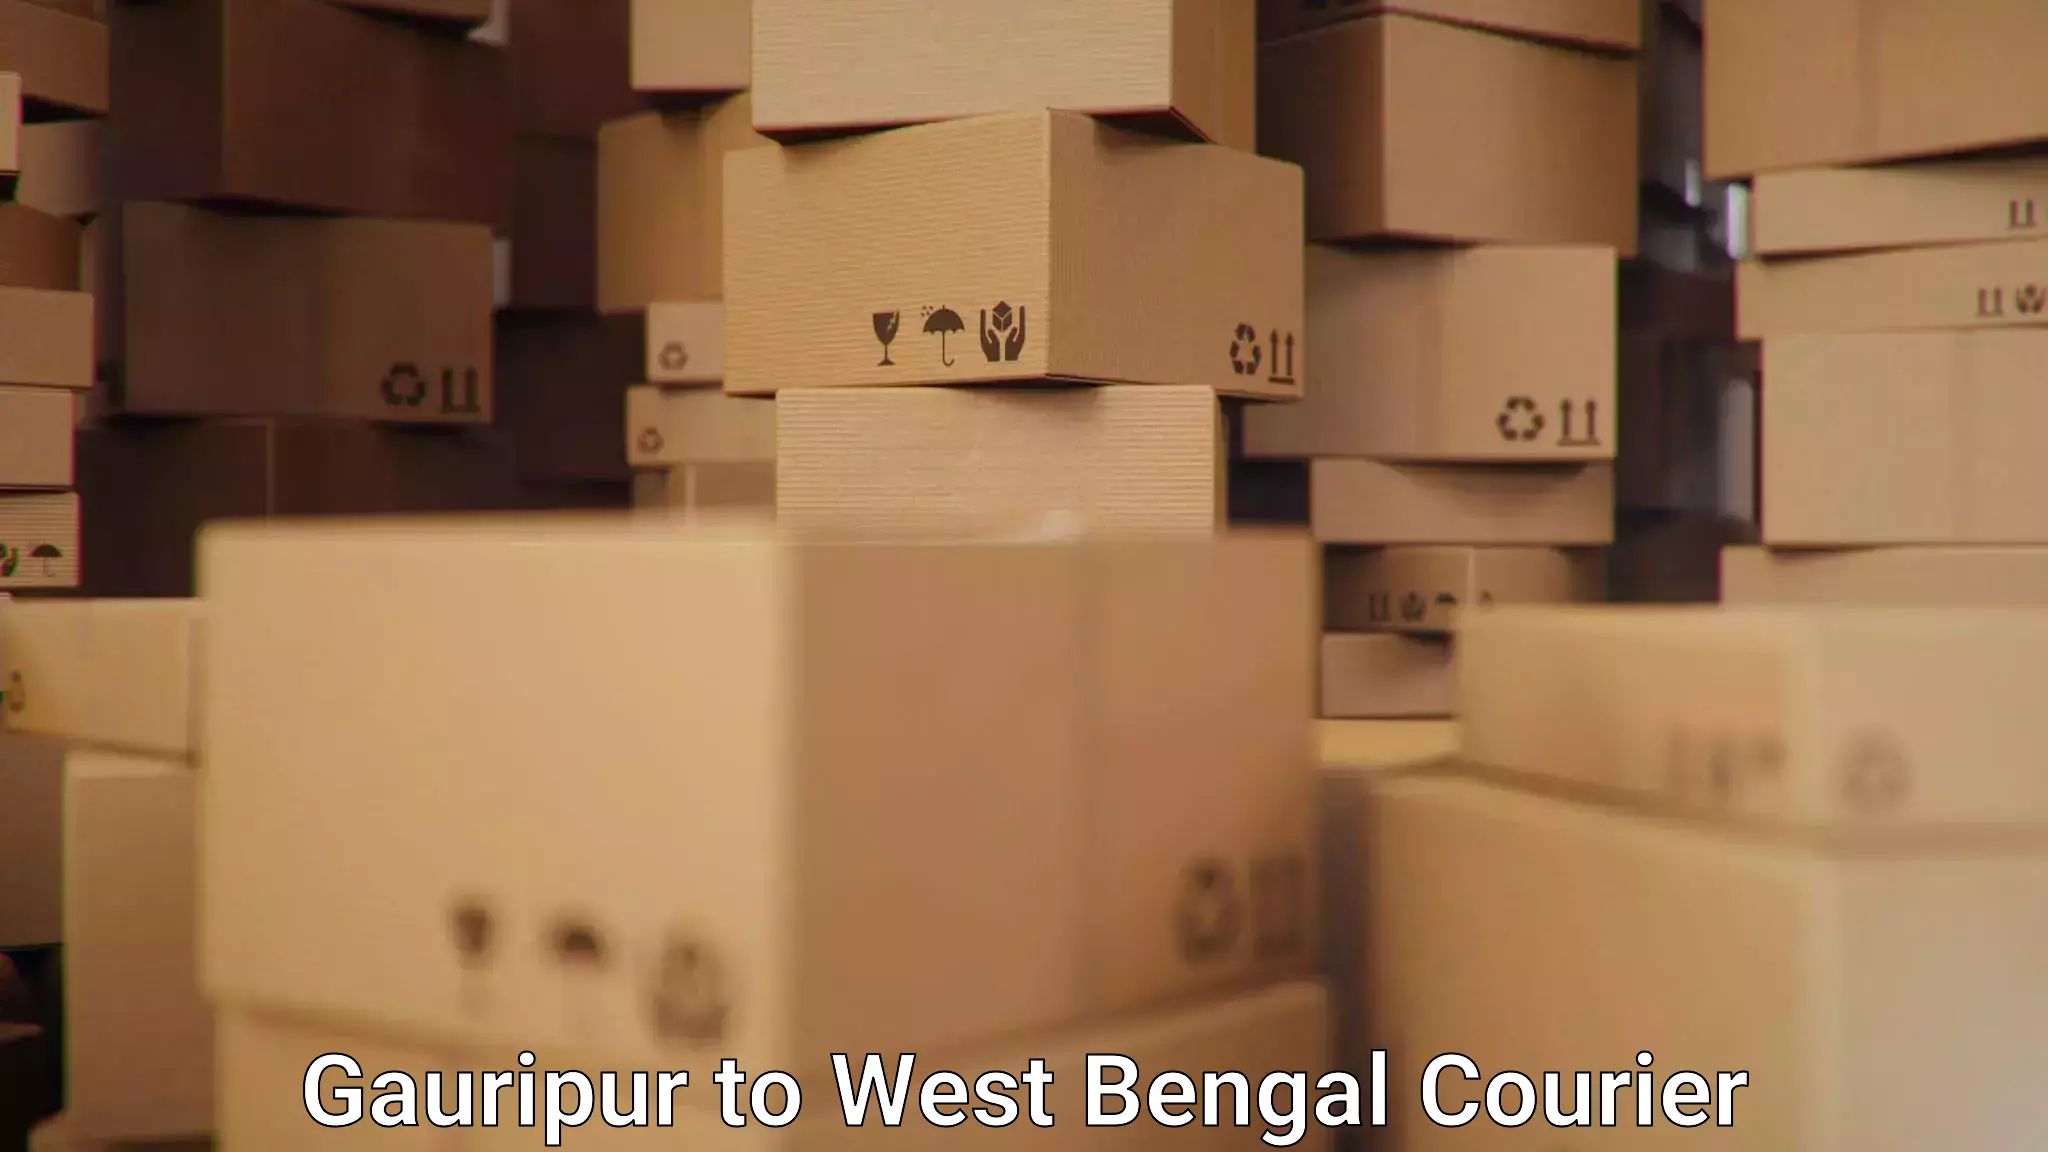 International courier networks Gauripur to Bagdogra